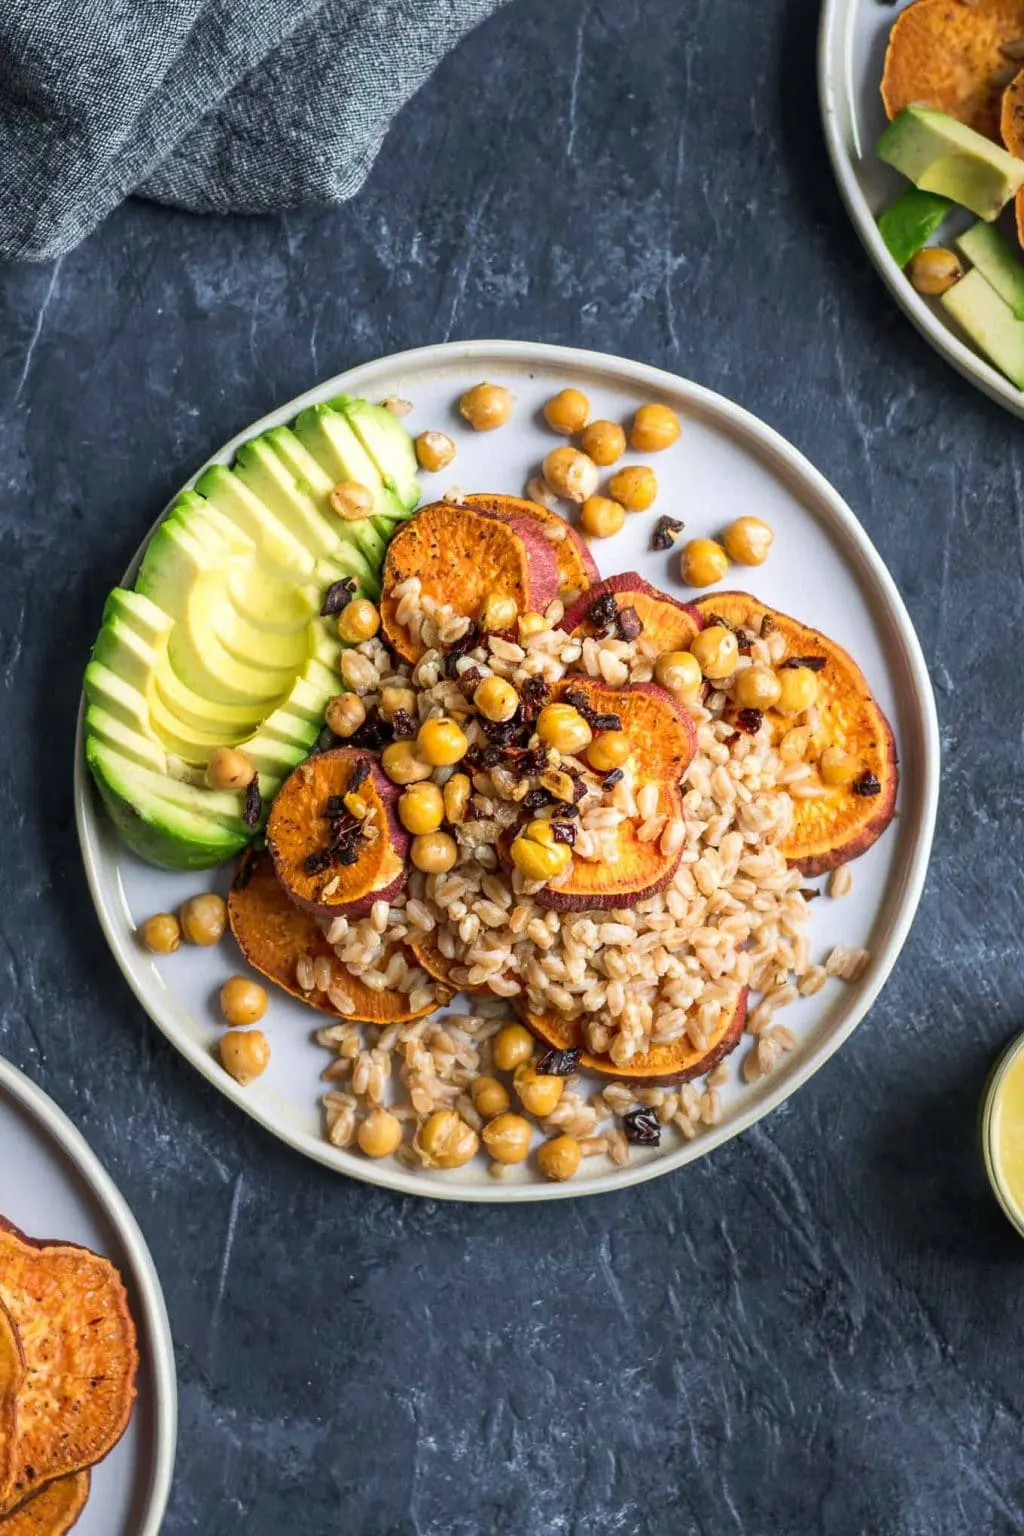 roasted sweet potatoes, farro, garlicky chickpeas and half an avocado before dressing